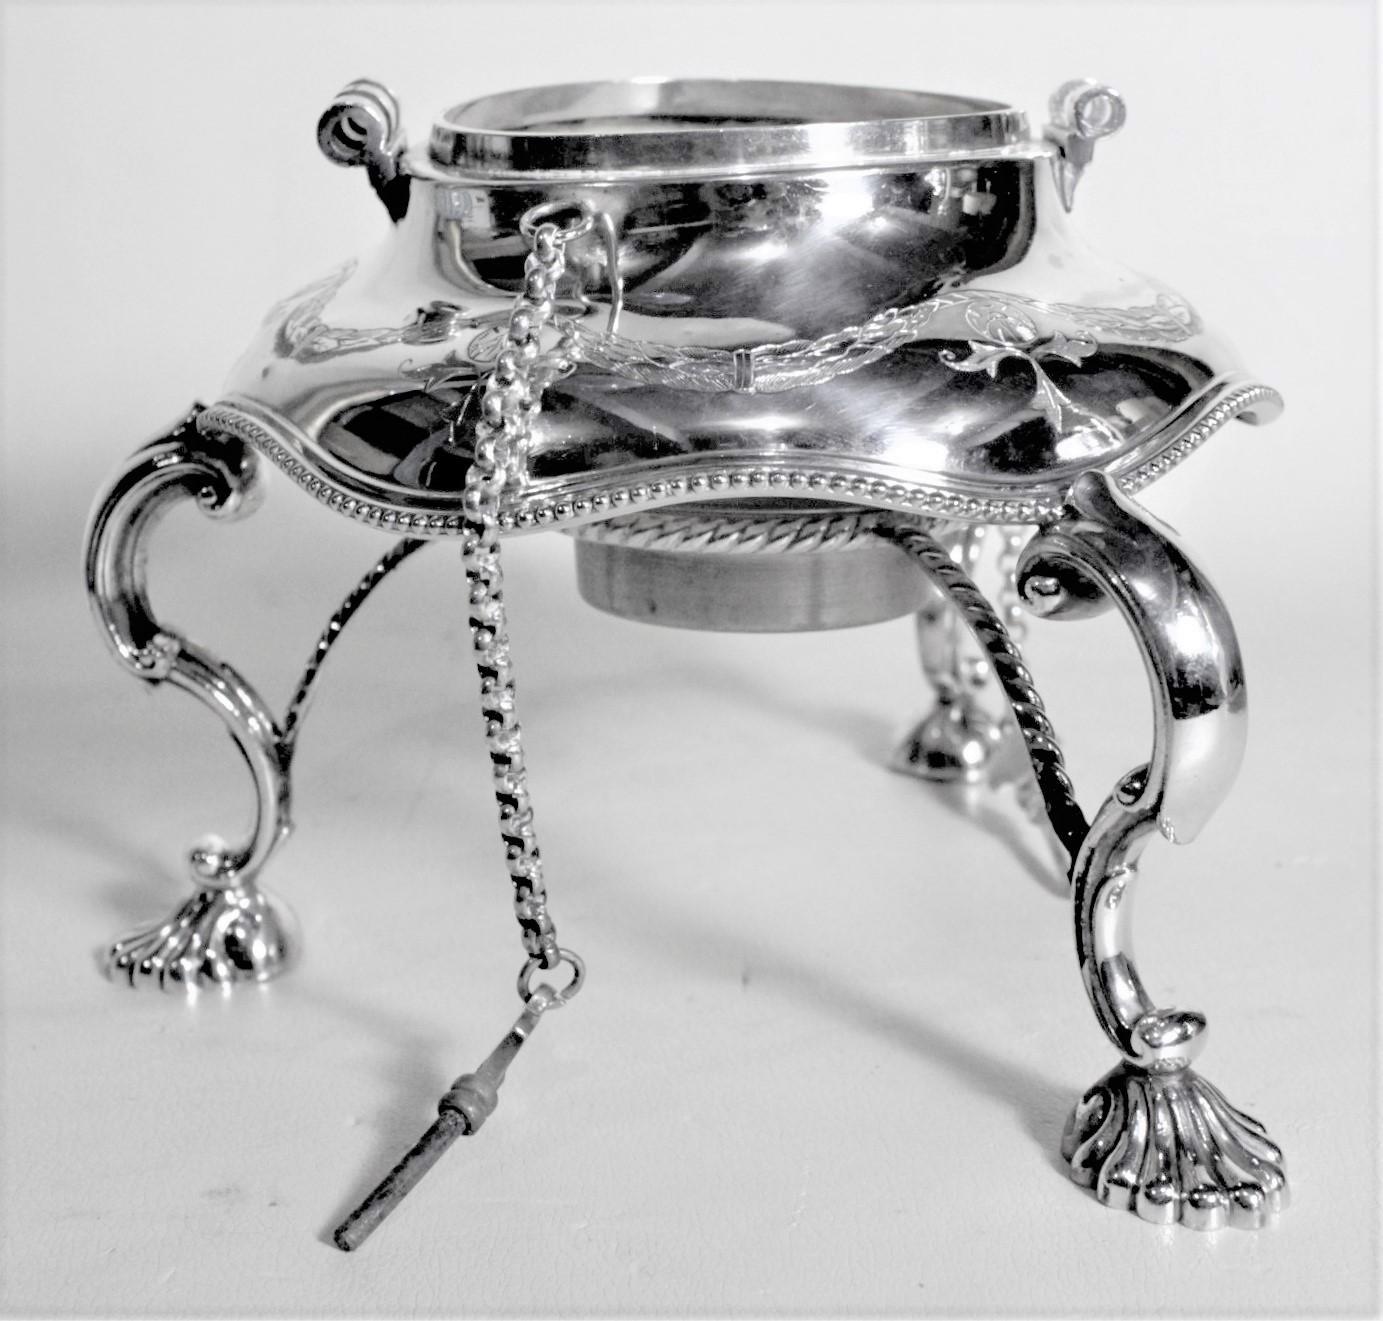 Edwardian Antique English Silver Plated Tipping Teapot or Kettle with Helmut Top and Stand For Sale